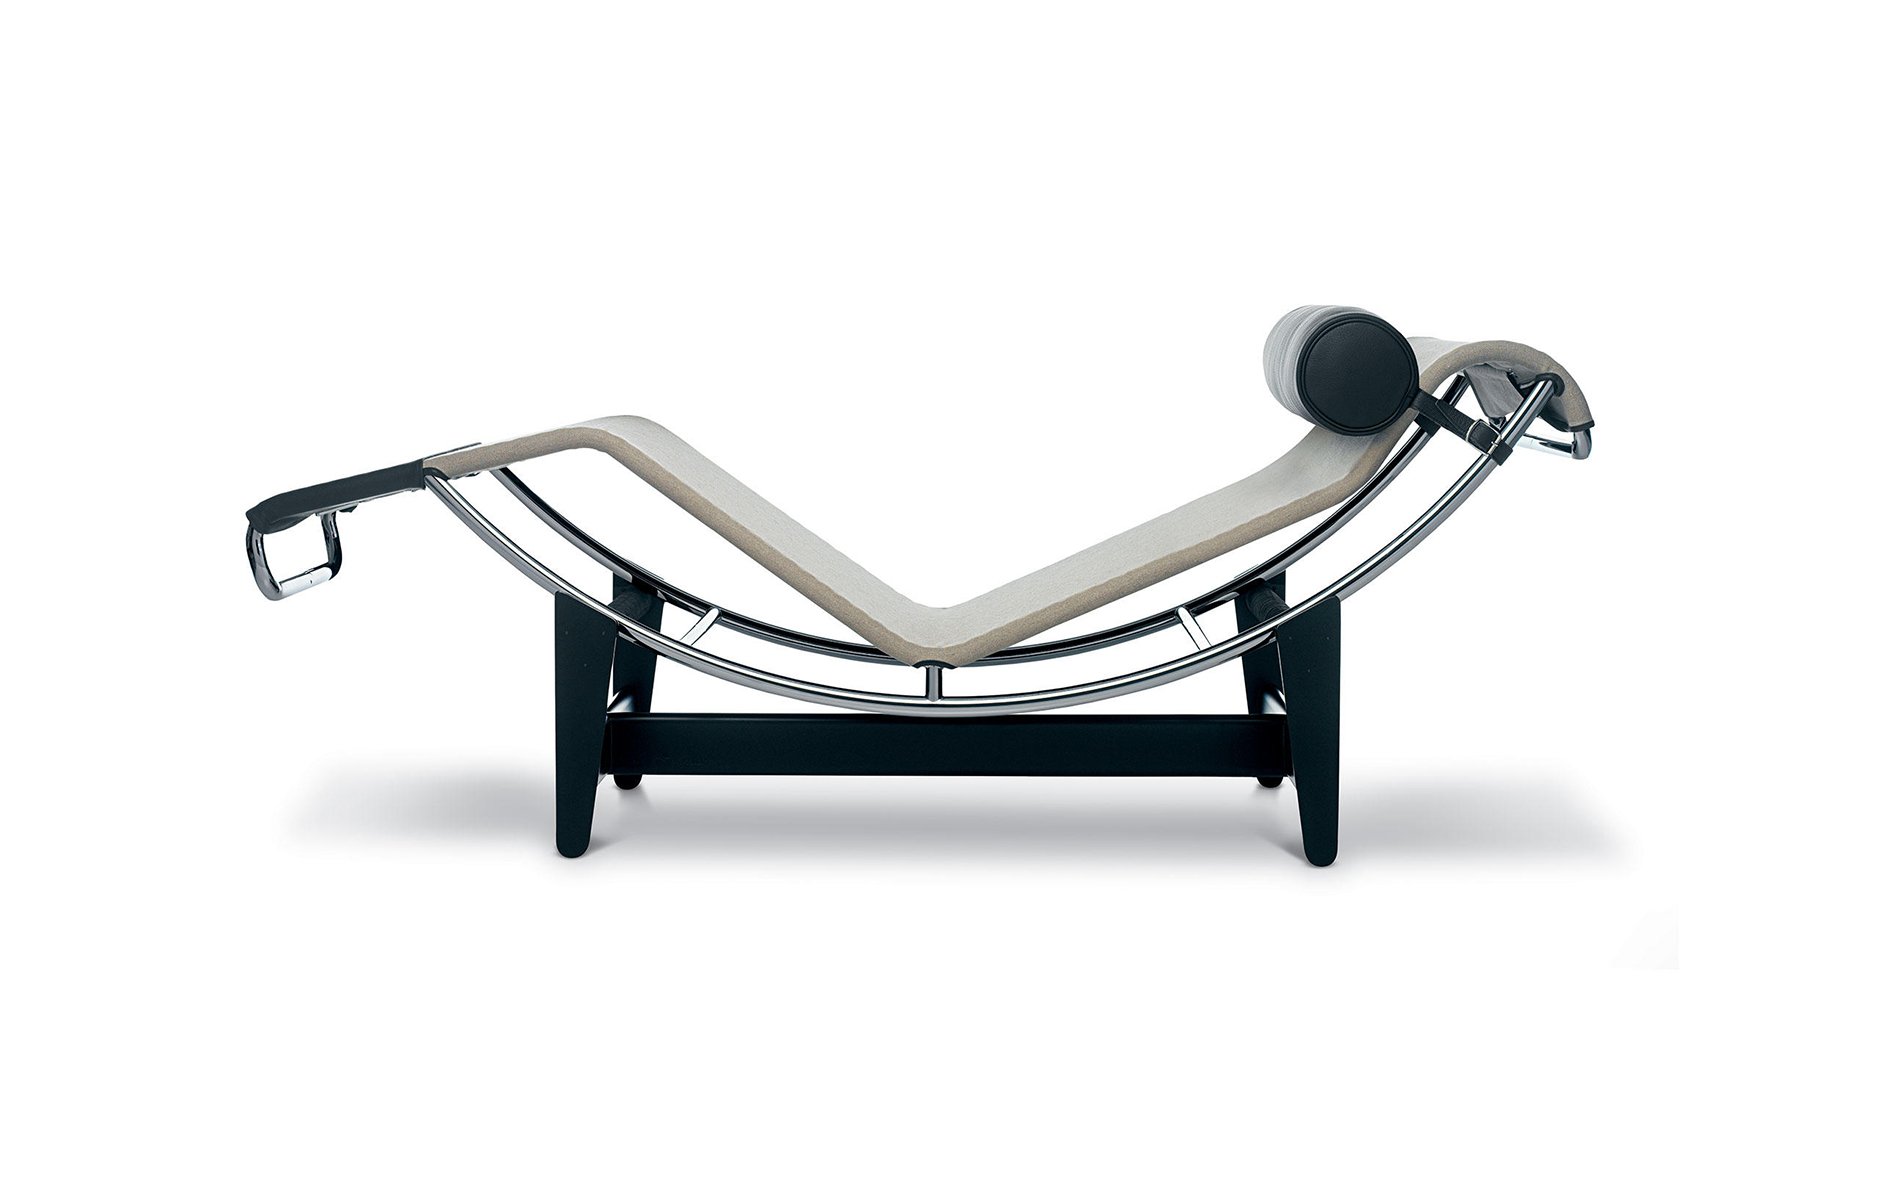 The famous LC4 chaise designed by Charlotte Perriand, Le Corbusier and Pierre Jeanneret in 1928 is an icon of early 20th century furniture design, evoking the machine age aesthetic and a momentous push away from decoration.